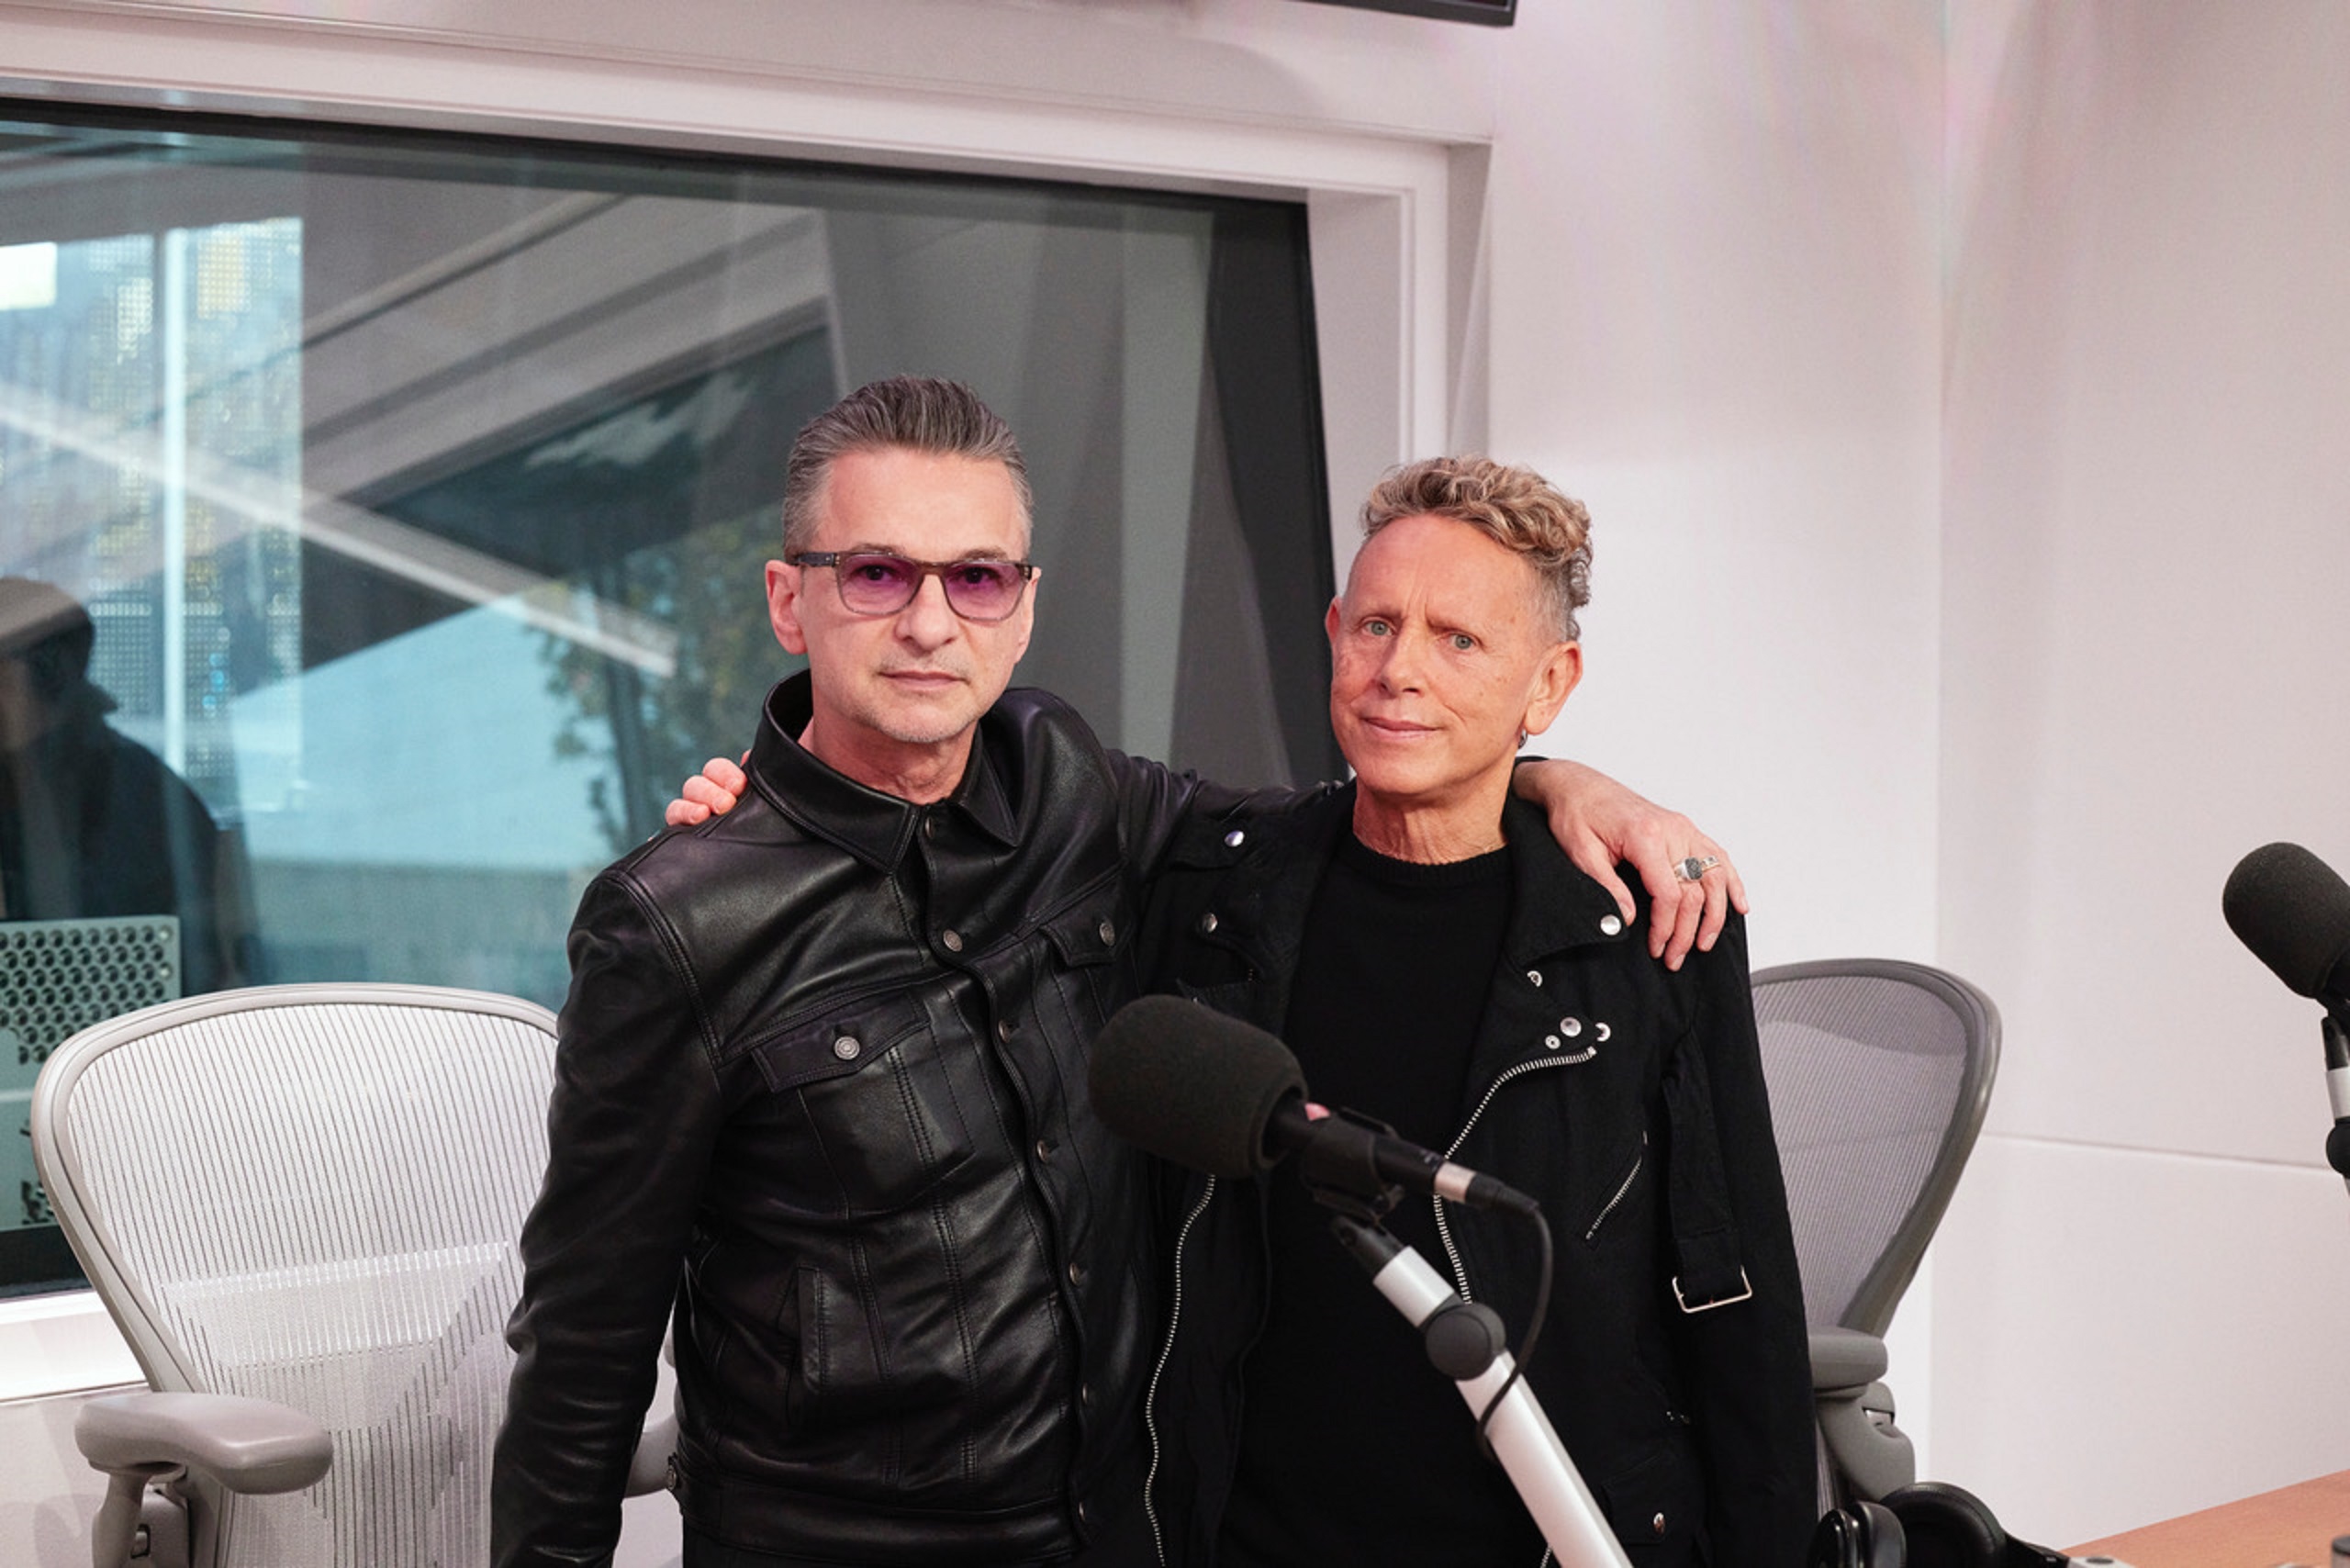 Depeche Mode Tell Apple Music About New Album 'Memento Mori', Passing of Andy “Fletch” Fletcher, Continuing To Evolve, Early Influences, and More